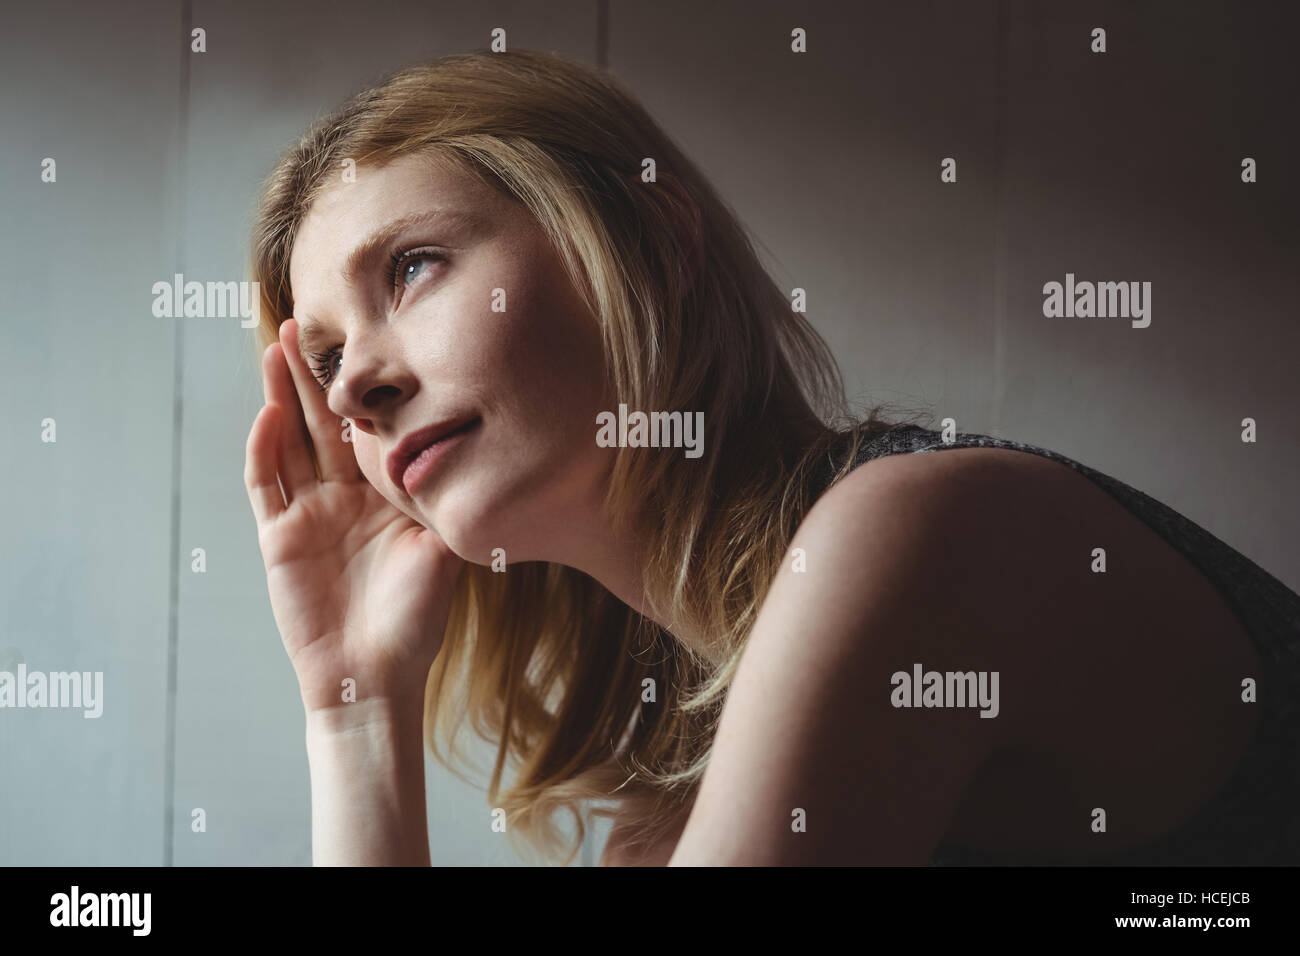 Thoughtful woman sitting with hand on forehead Stock Photo